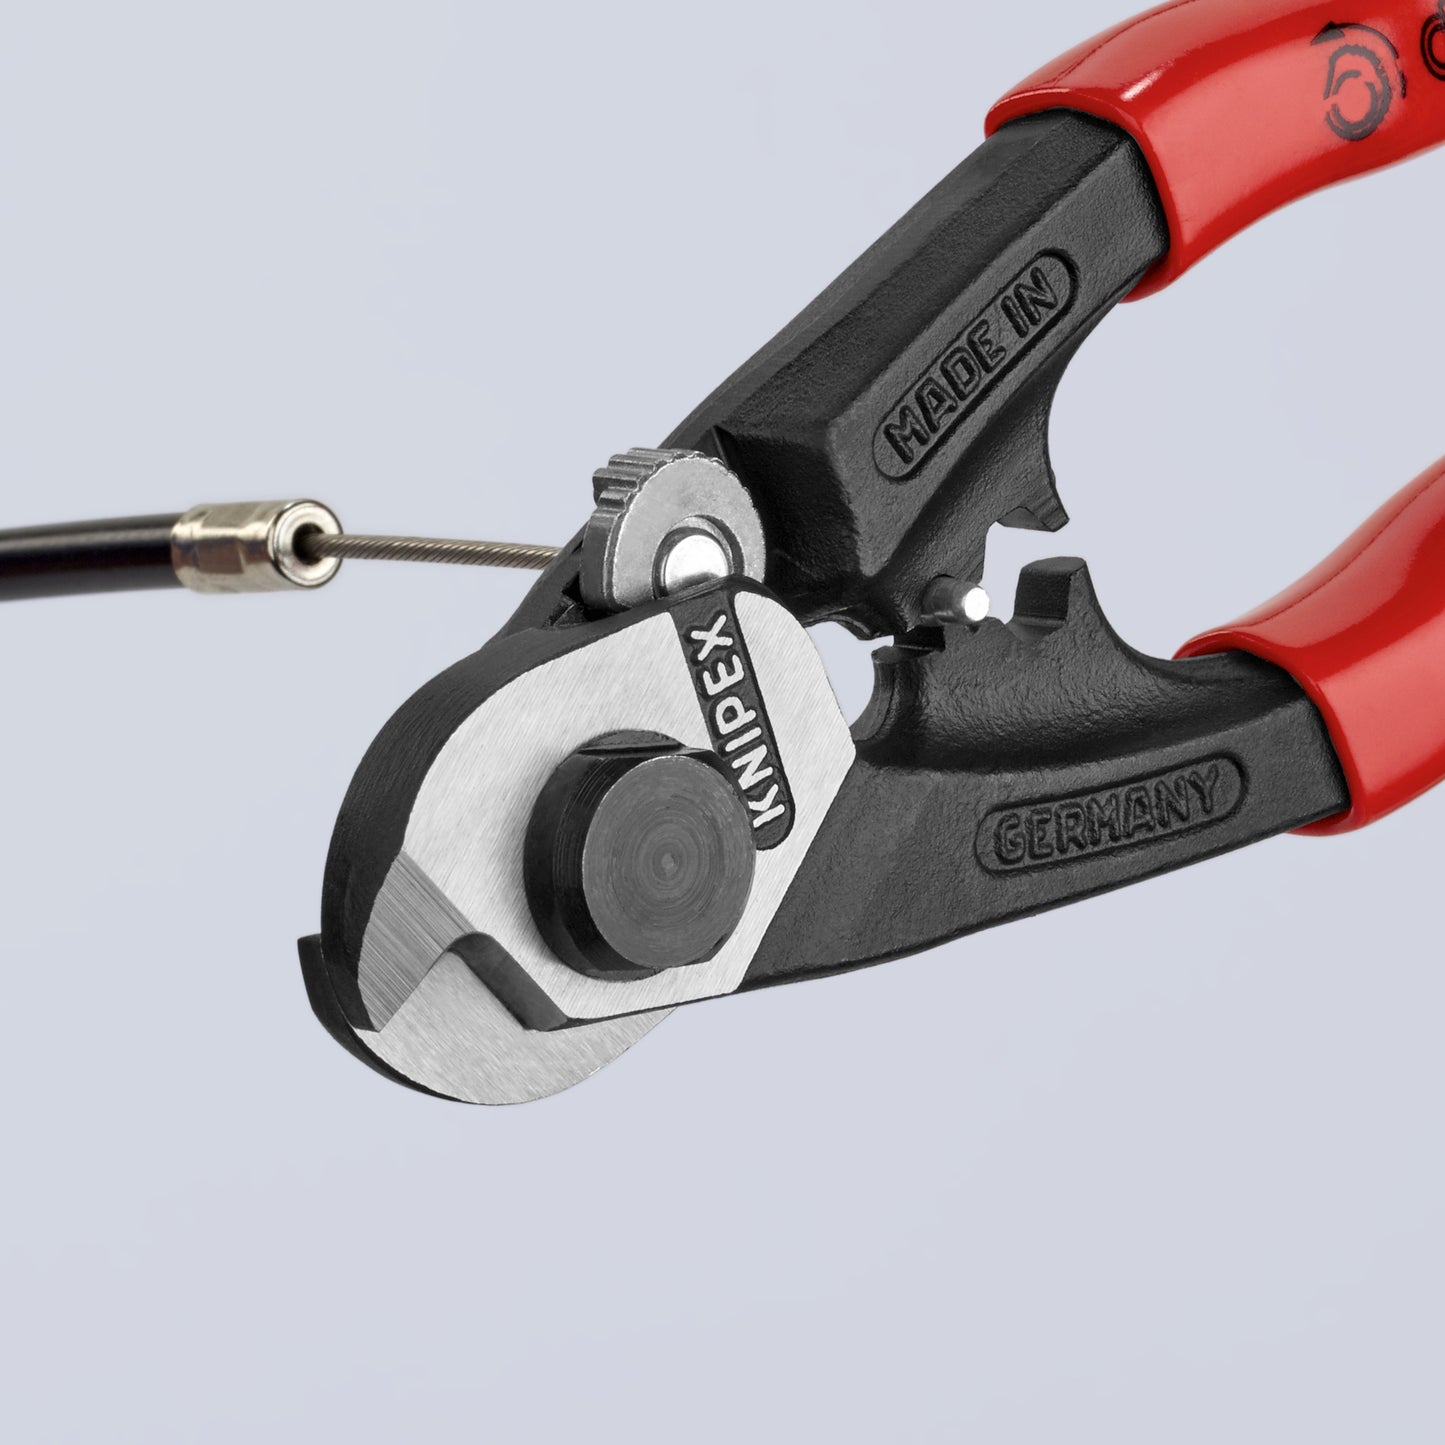 Knipex Wire Rope Cutters 7 1/2" 95 61 190